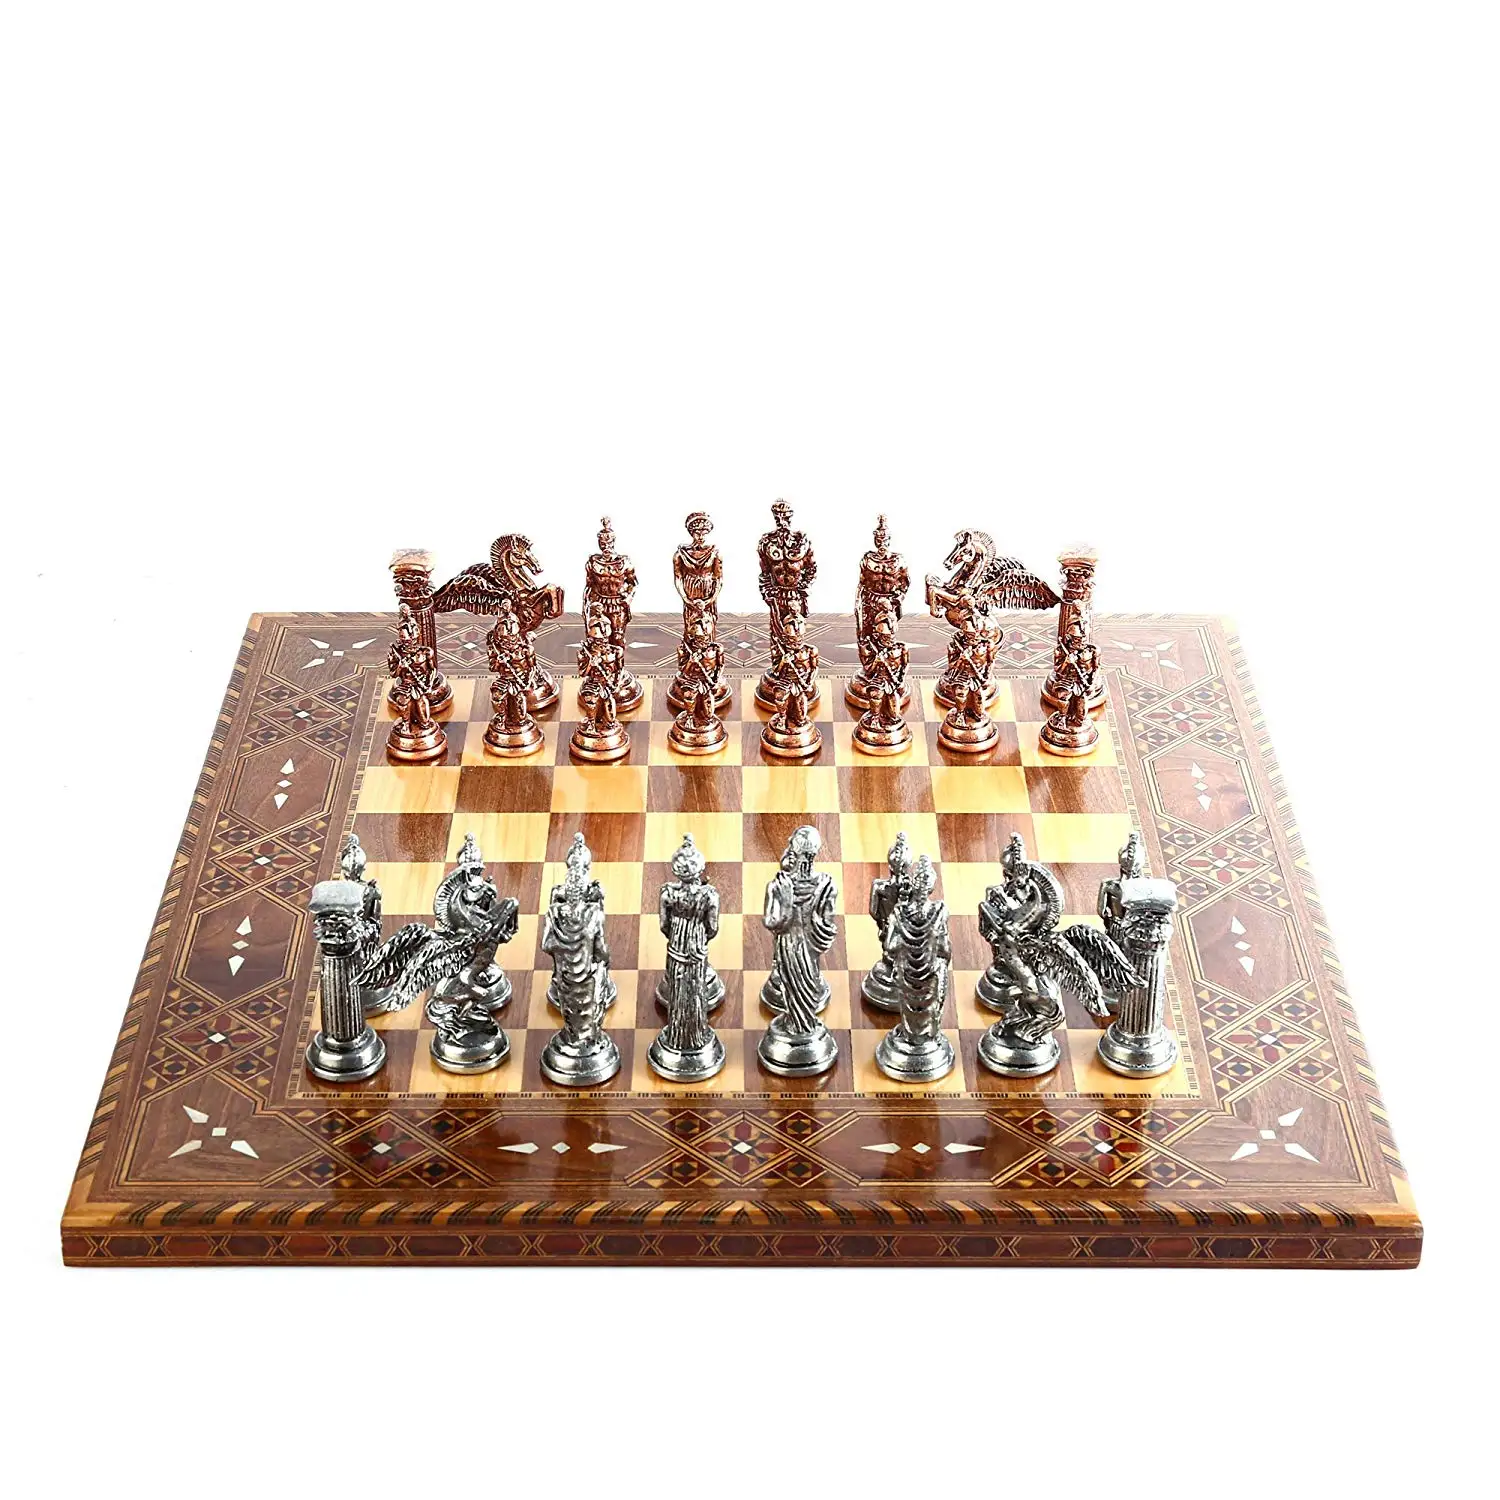 

Mythologic Pegasus Antique Copper Metal Chess Set,Handmade Pieces,Natural Solid Wooden Chess Board,Original Pearl, King 9.5cm